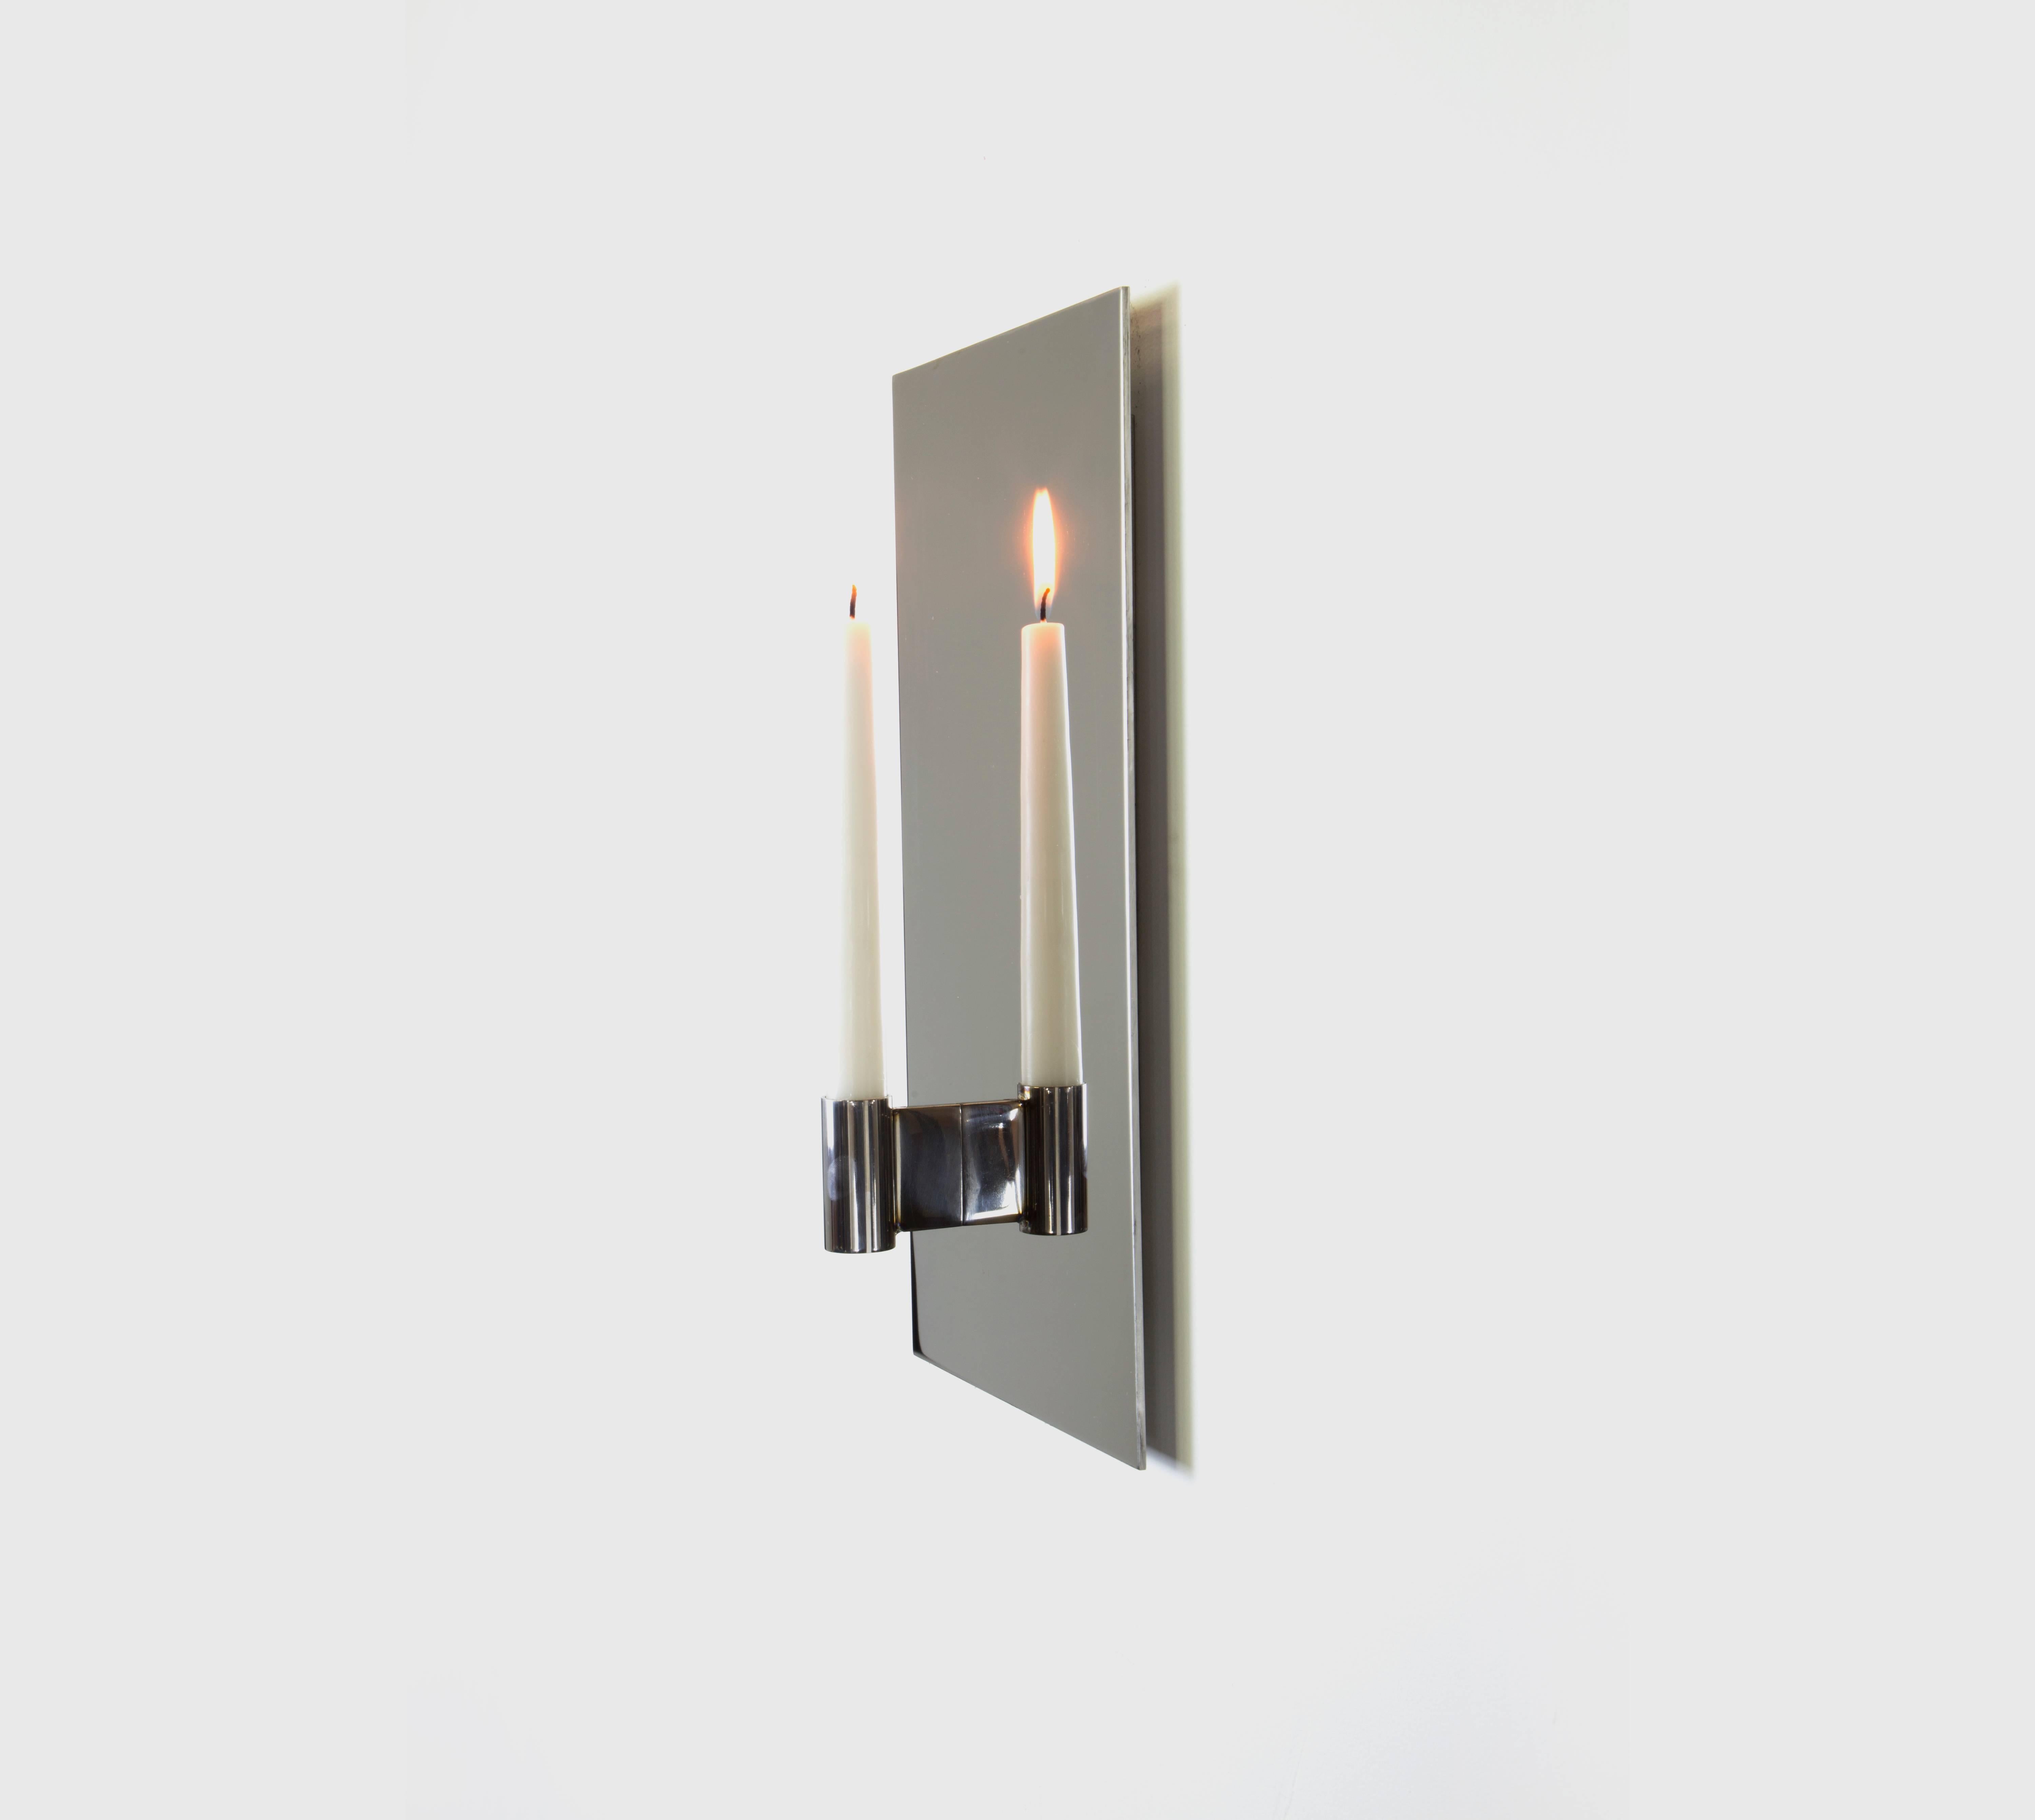 Américain Fferrone Contemporary Modernity Mirror Polished Stainless Steel Candle Wall Scone (Scone mural pour bougie) en vente